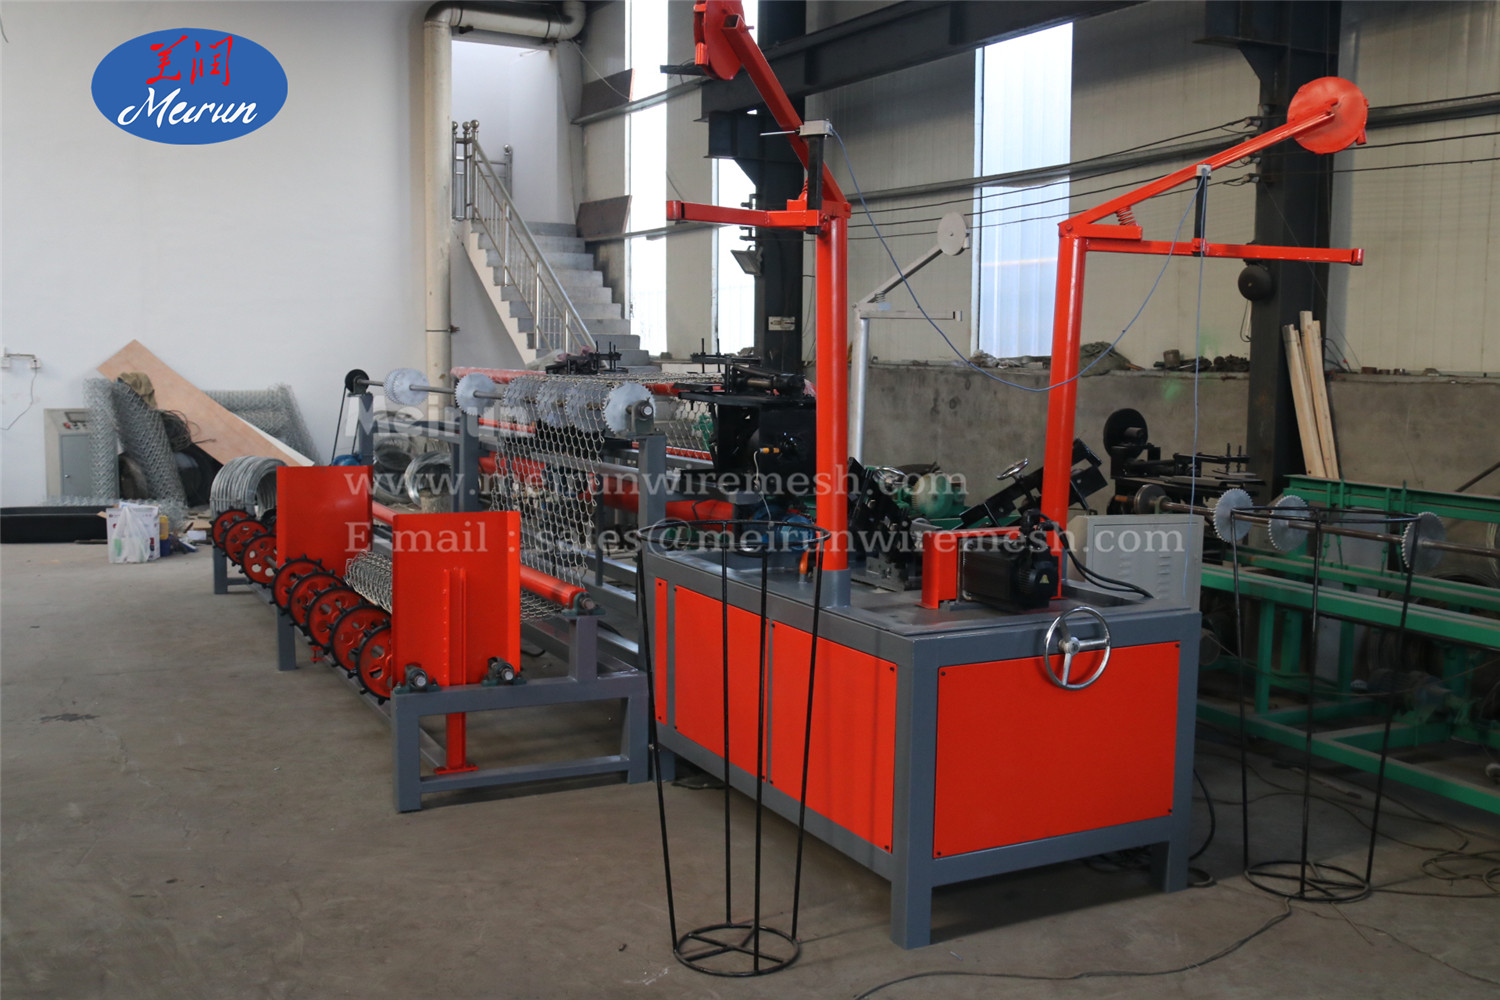 Reliable Quality PVC Coated Wire / Galvanized Wire Chain Link Fence Machine